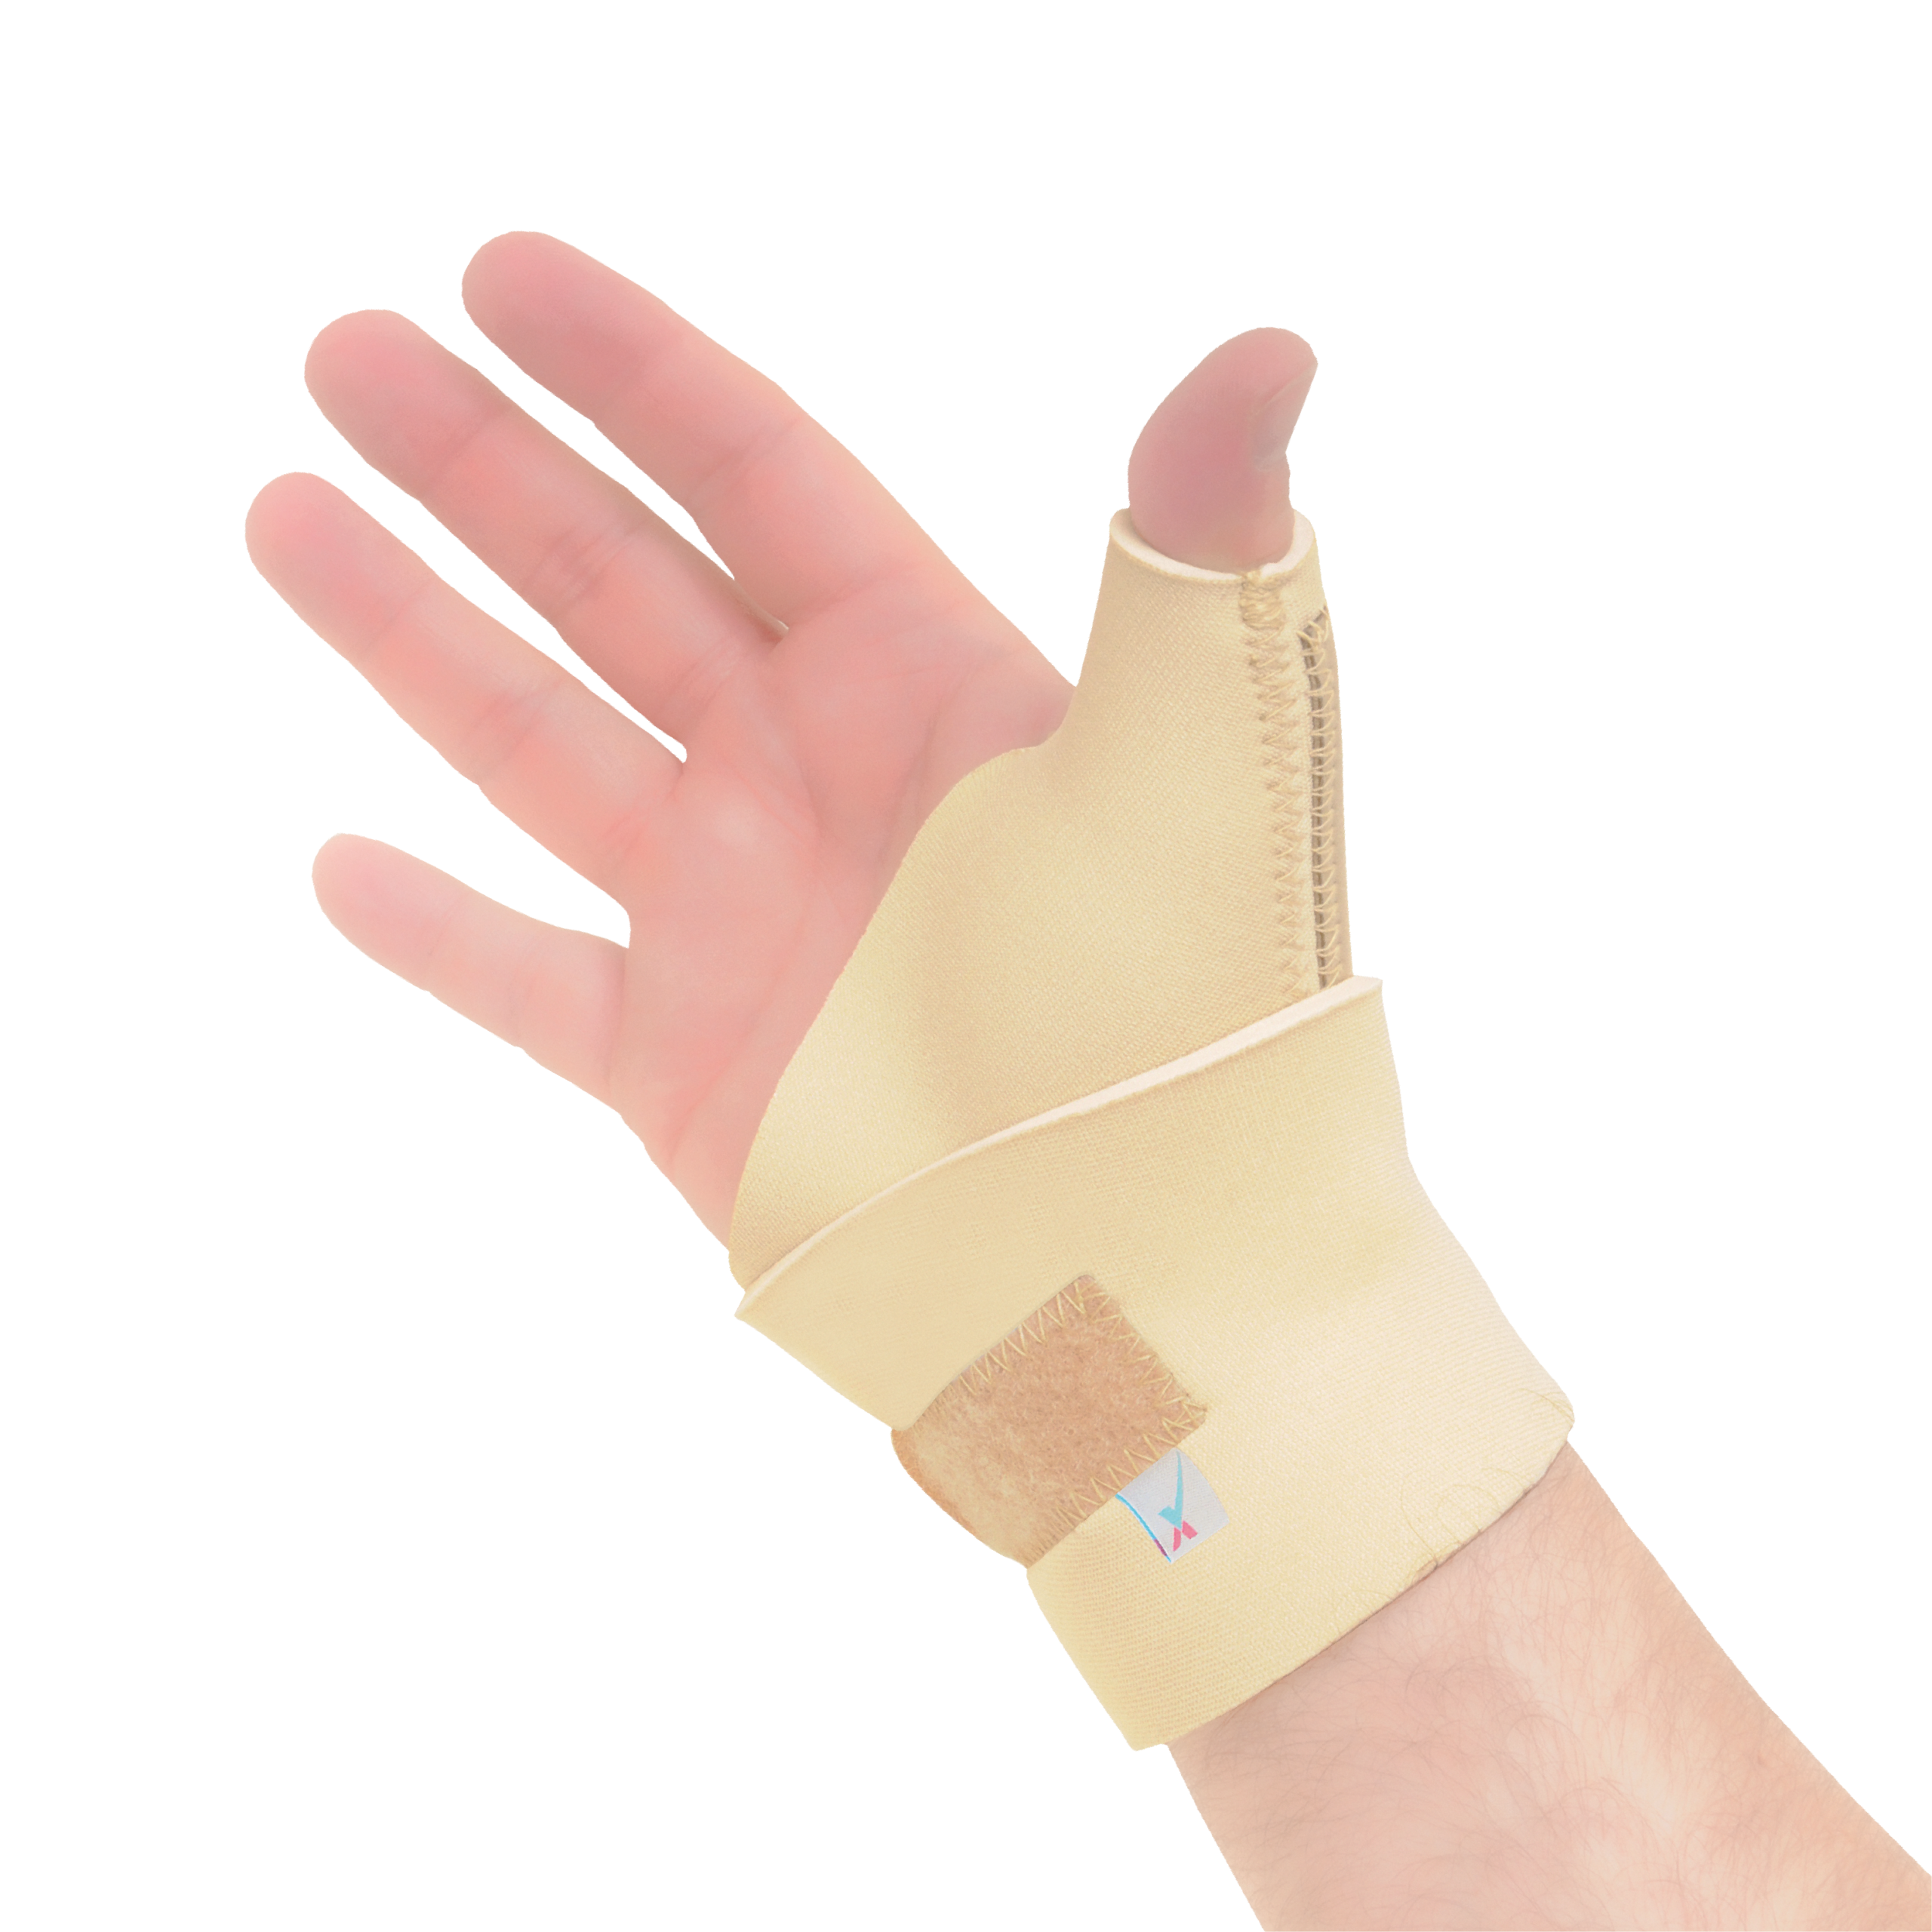 Express Orthopaedic Abducted Thumb Wrap